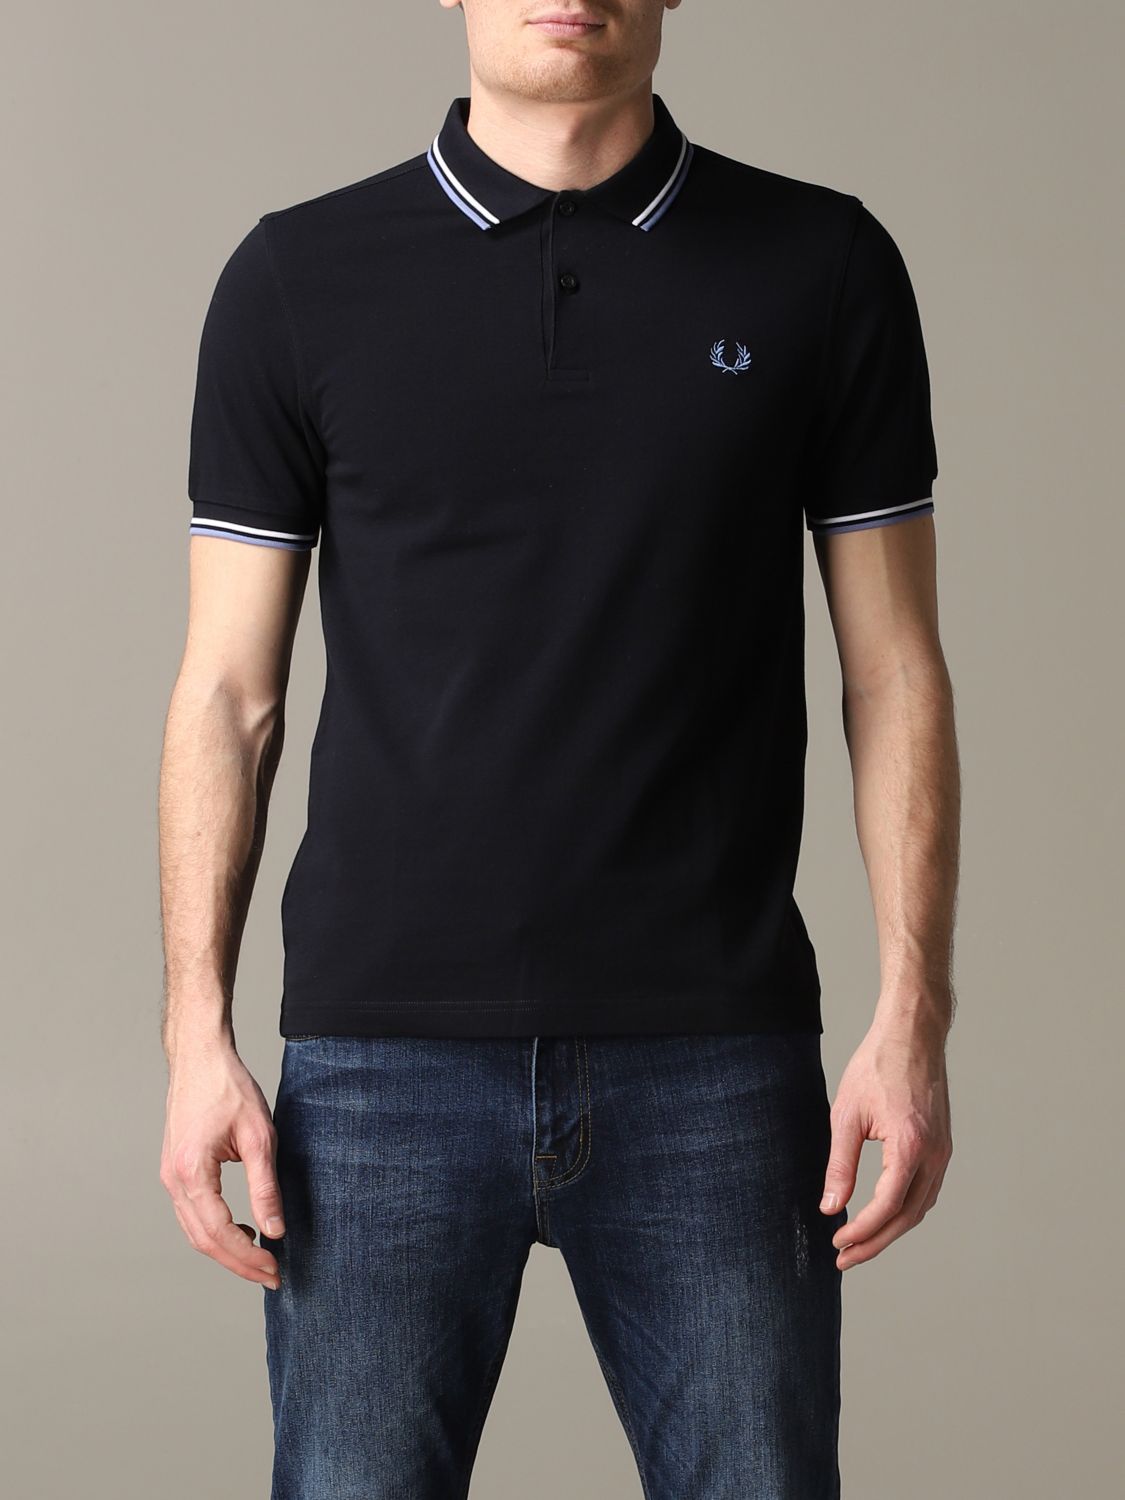 Fred Perry Outlet: T-shirt men - Avion | Polo Shirt Fred Perry M3600 ...